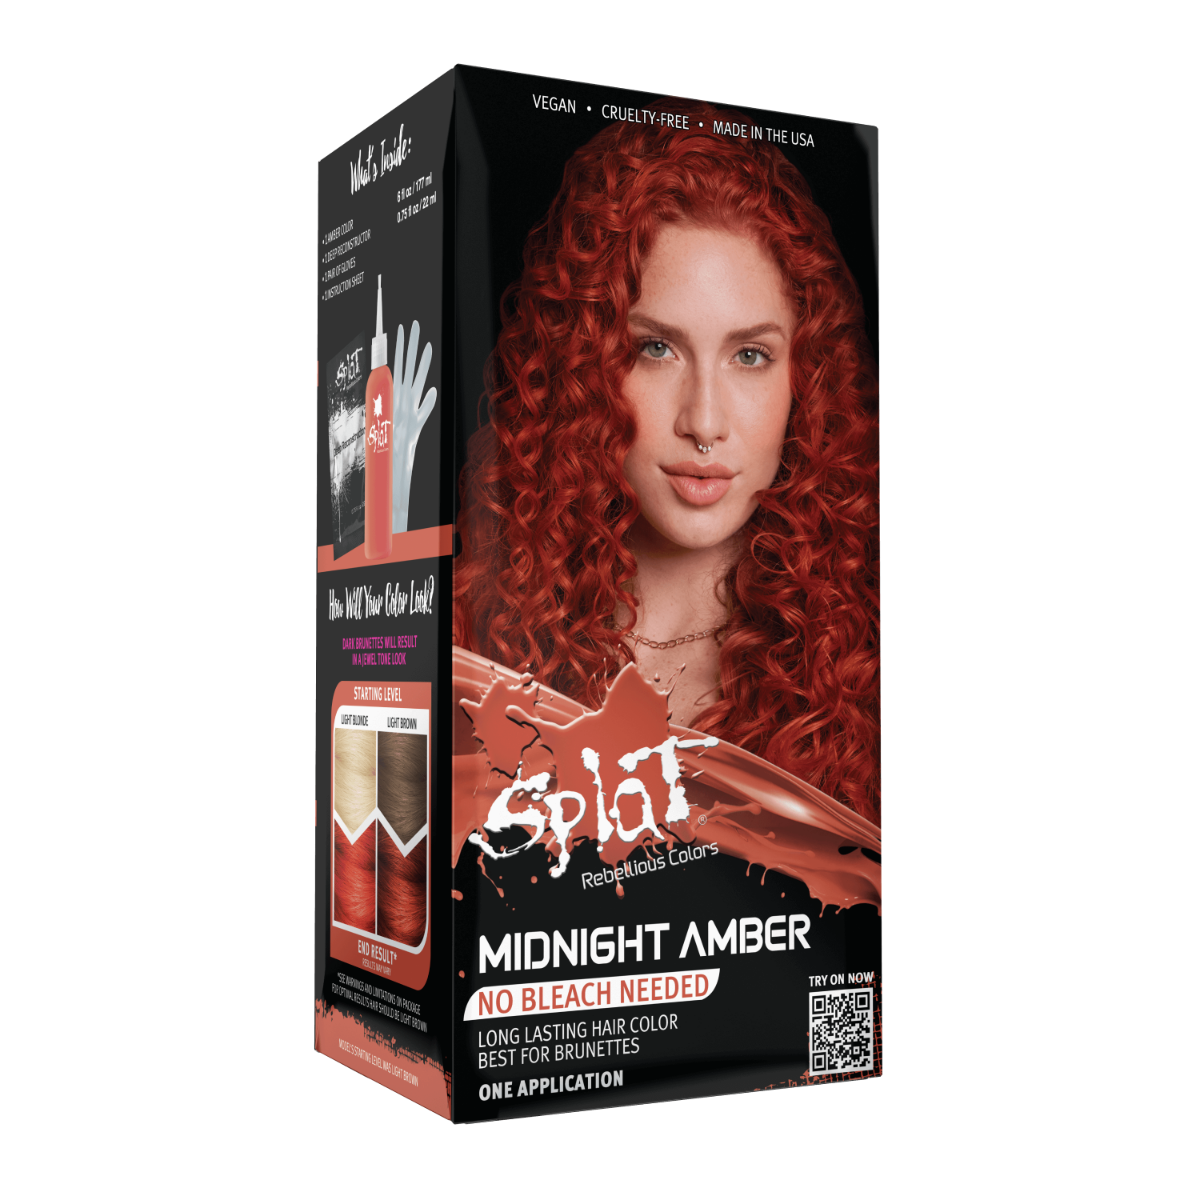 A box of Splat Hair Color's Midnight Amber Hair Dye